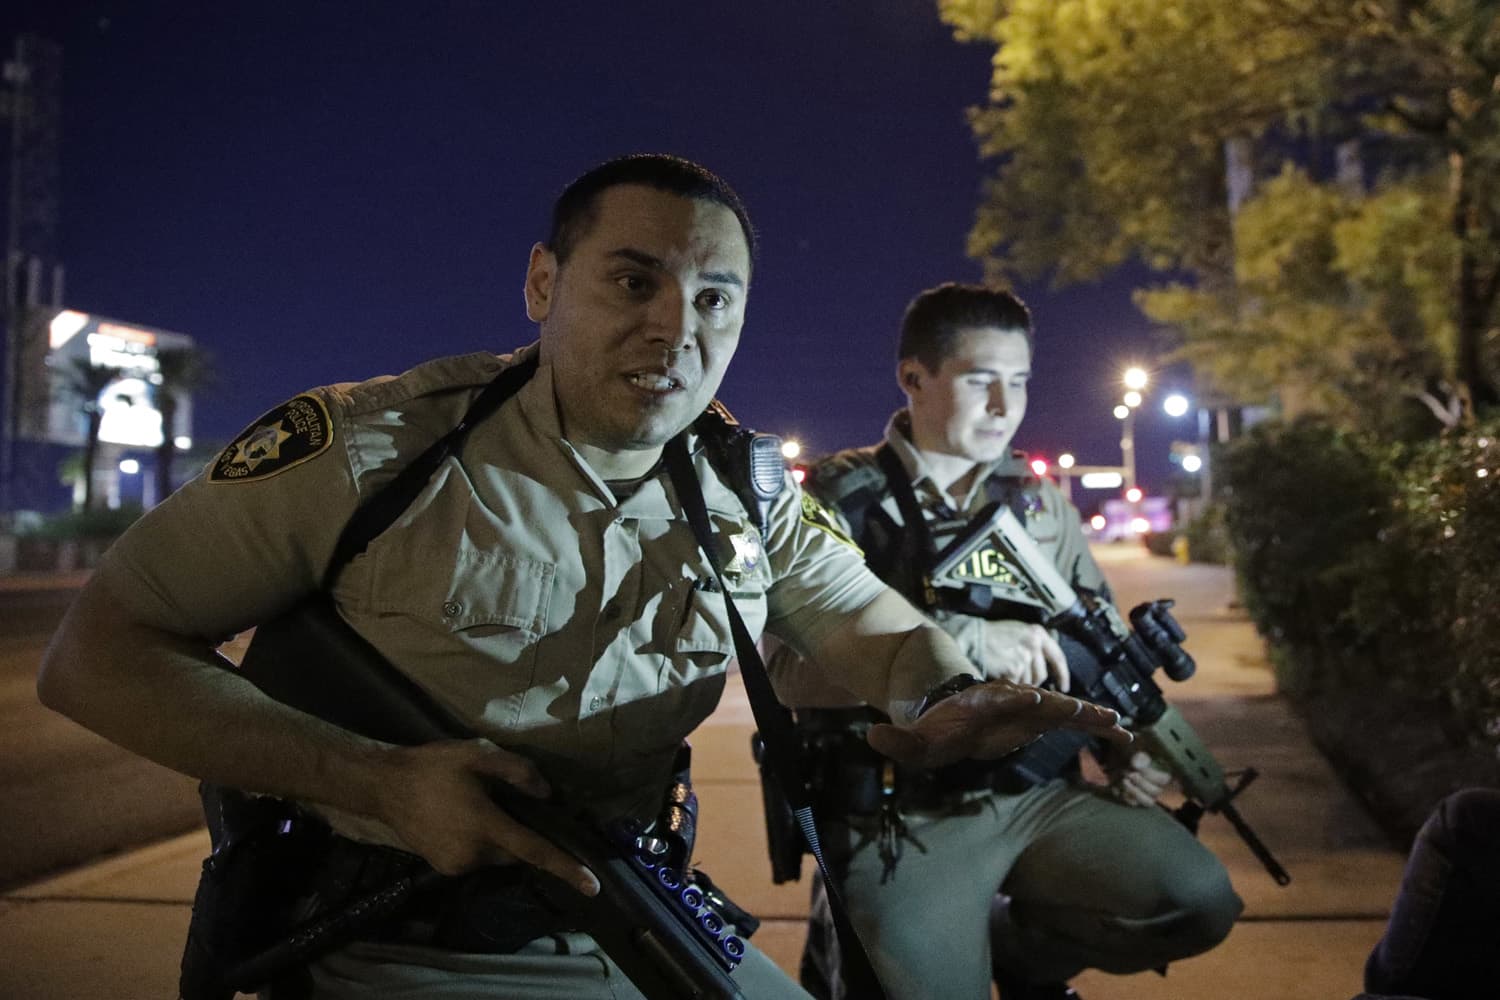 Police officers advise people to take cover near the scene of a shooting near the Mandalay Bay resort and casino on the Las Vegas Strip, Sunday, Oct. 1, 2017, in Las Vegas. (John Locher/AP)